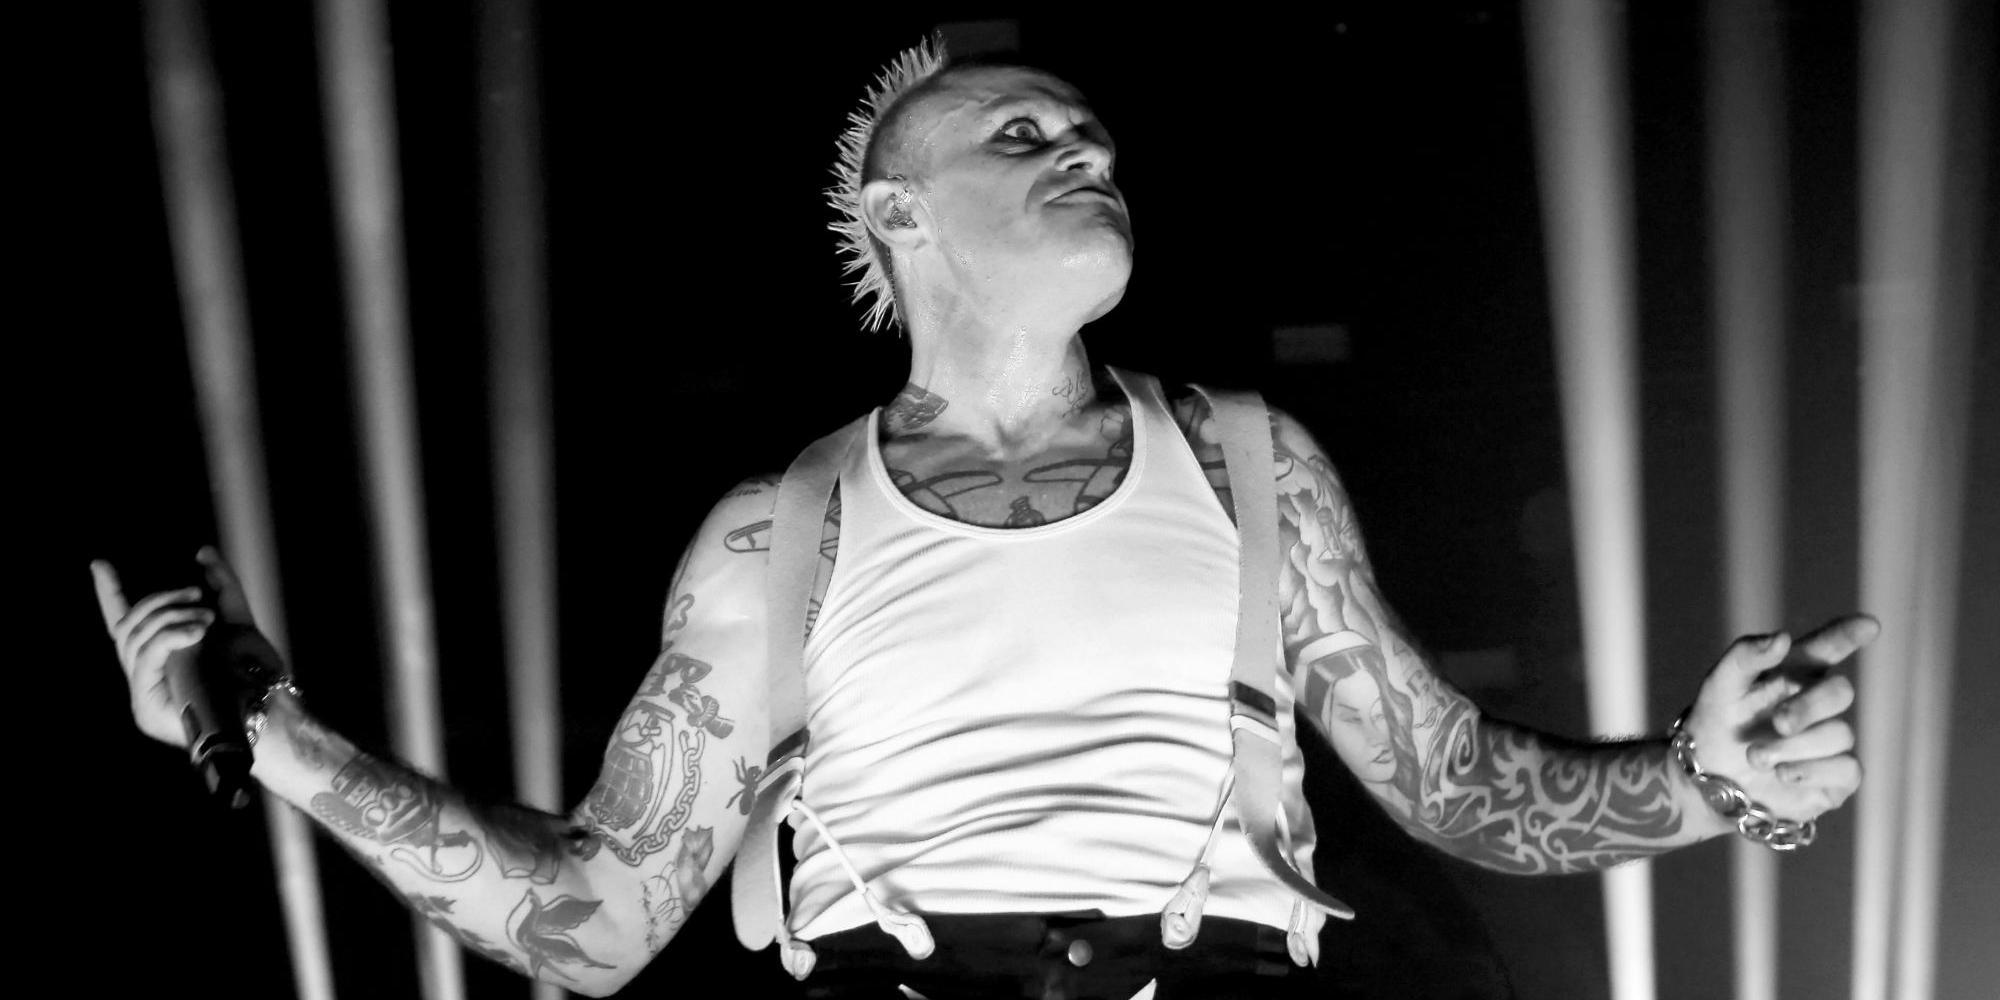 The Prodigy's Keith Flint has passed away. Editorial. Bandwagon